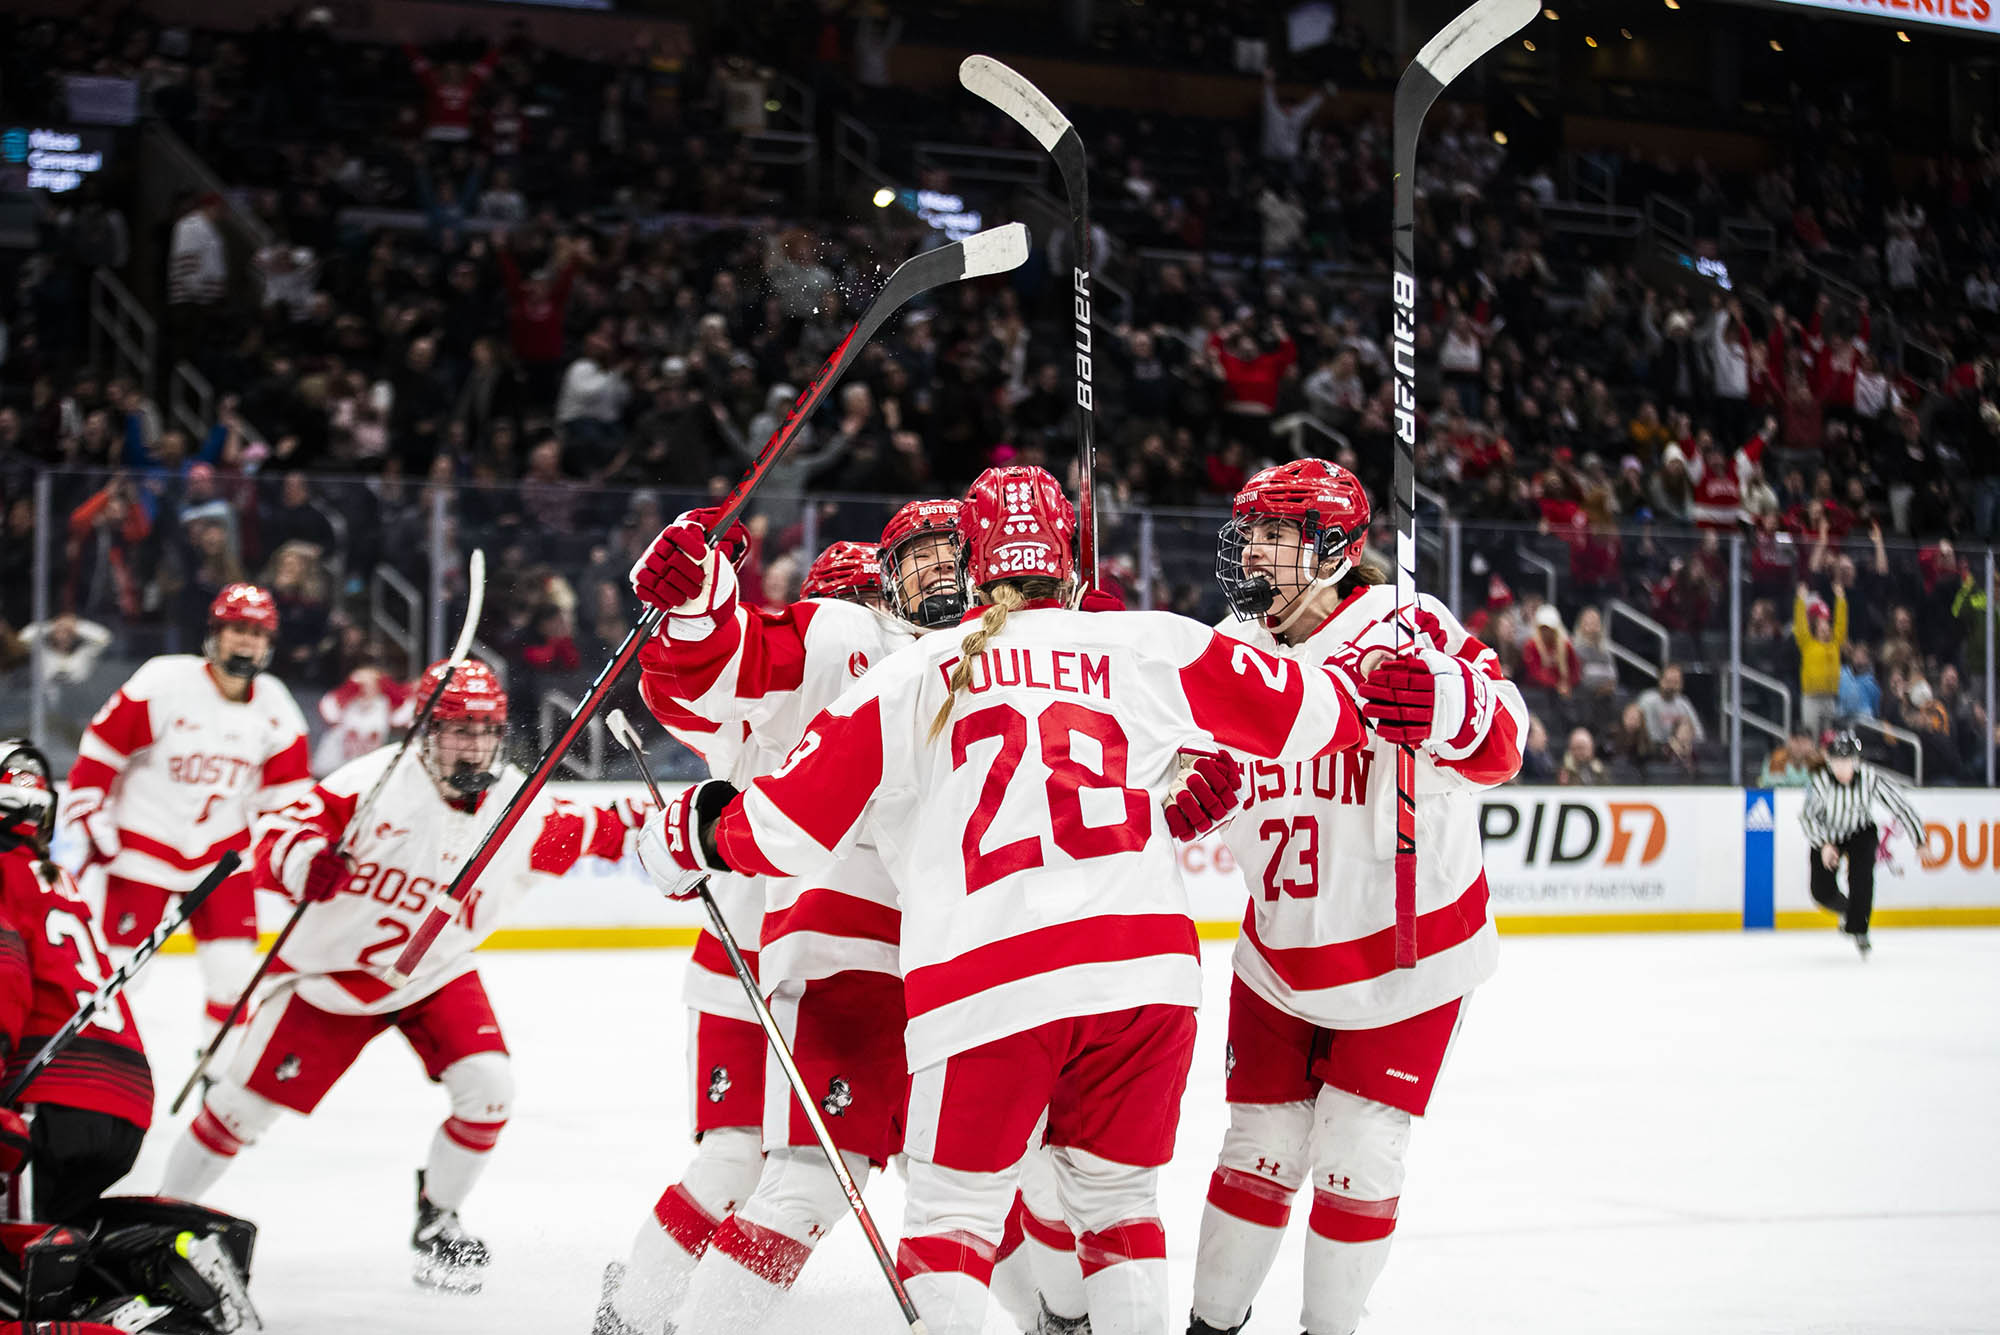 Photo: Foulem, one of BU's women's players celebrates her tie-making goal at Women's 2024 Beanpot.